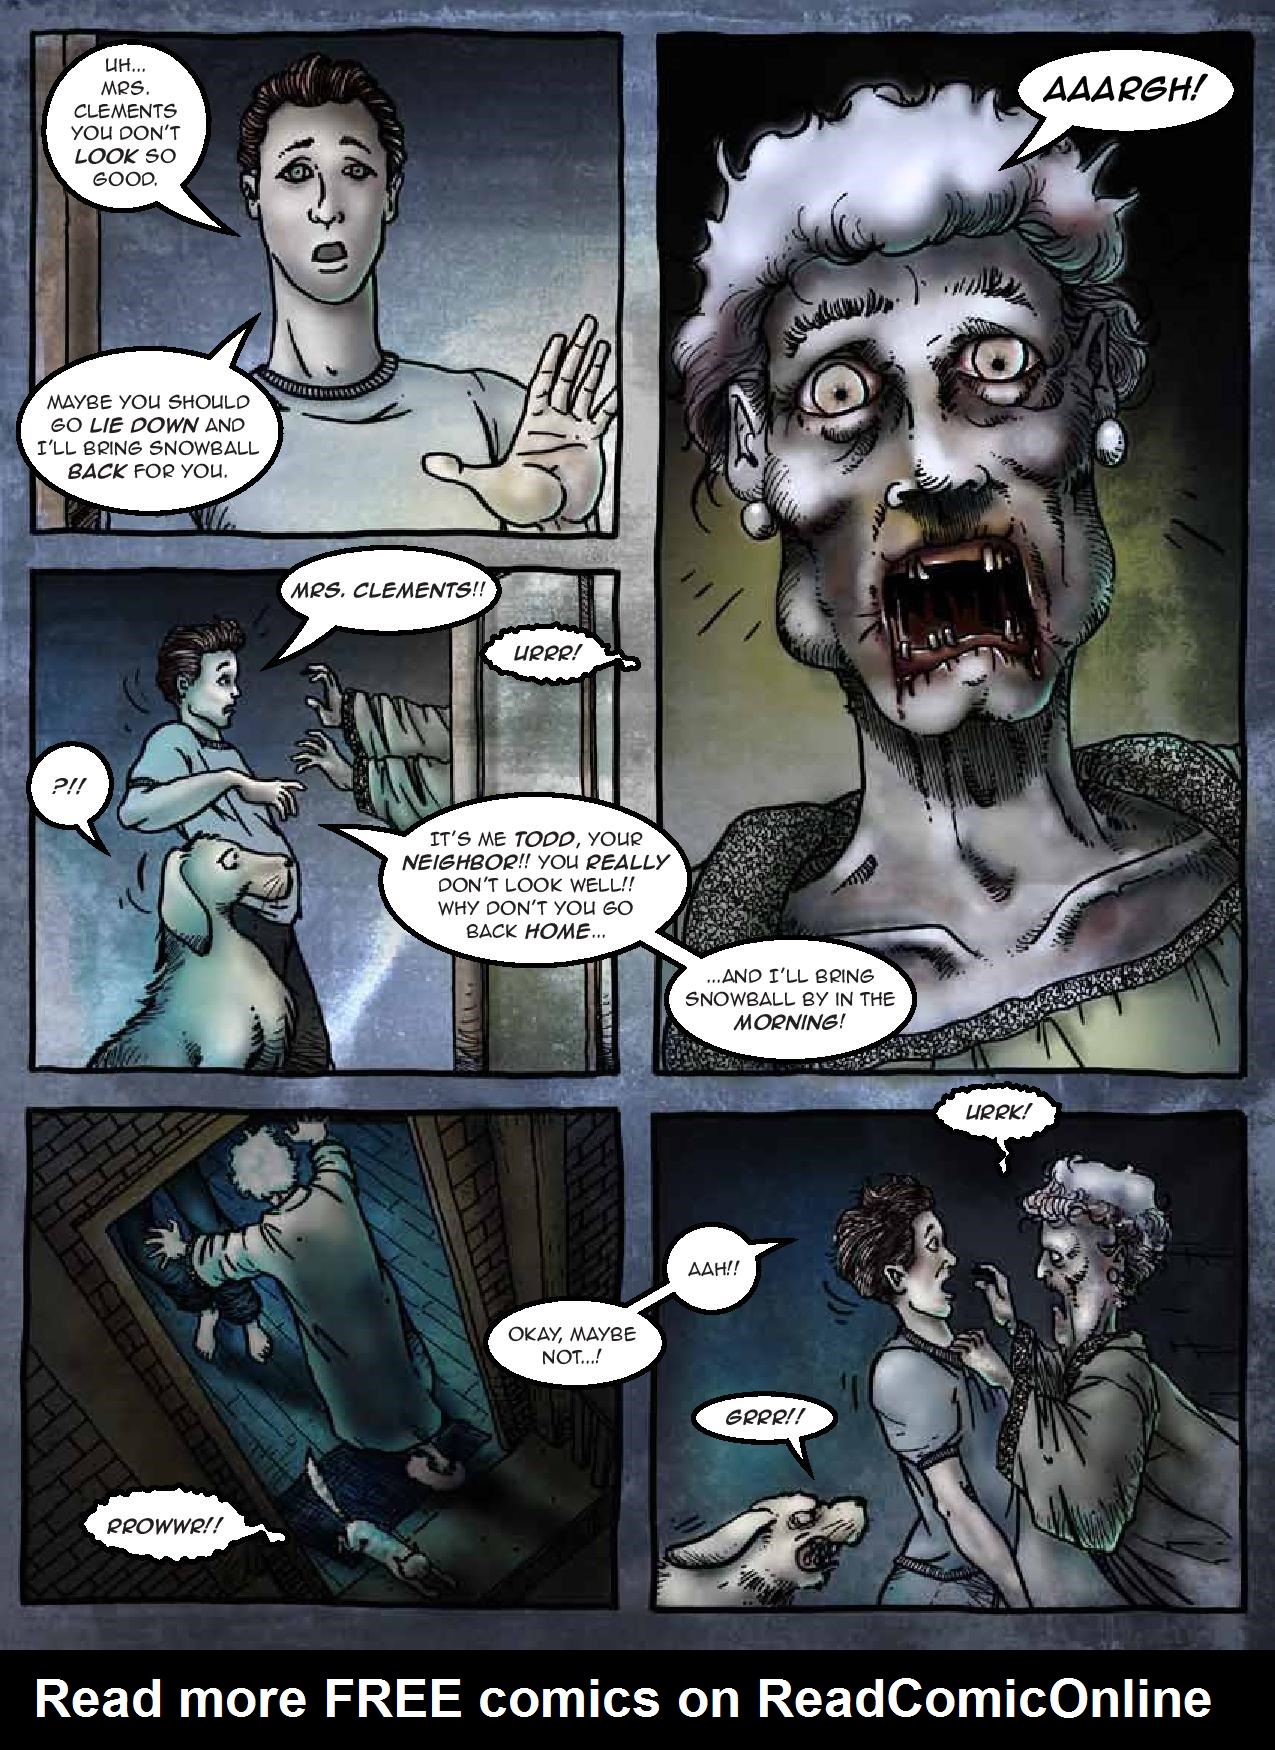 Read online Preparedness 101: A Zombie Pandemic comic -  Issue # Full - 10